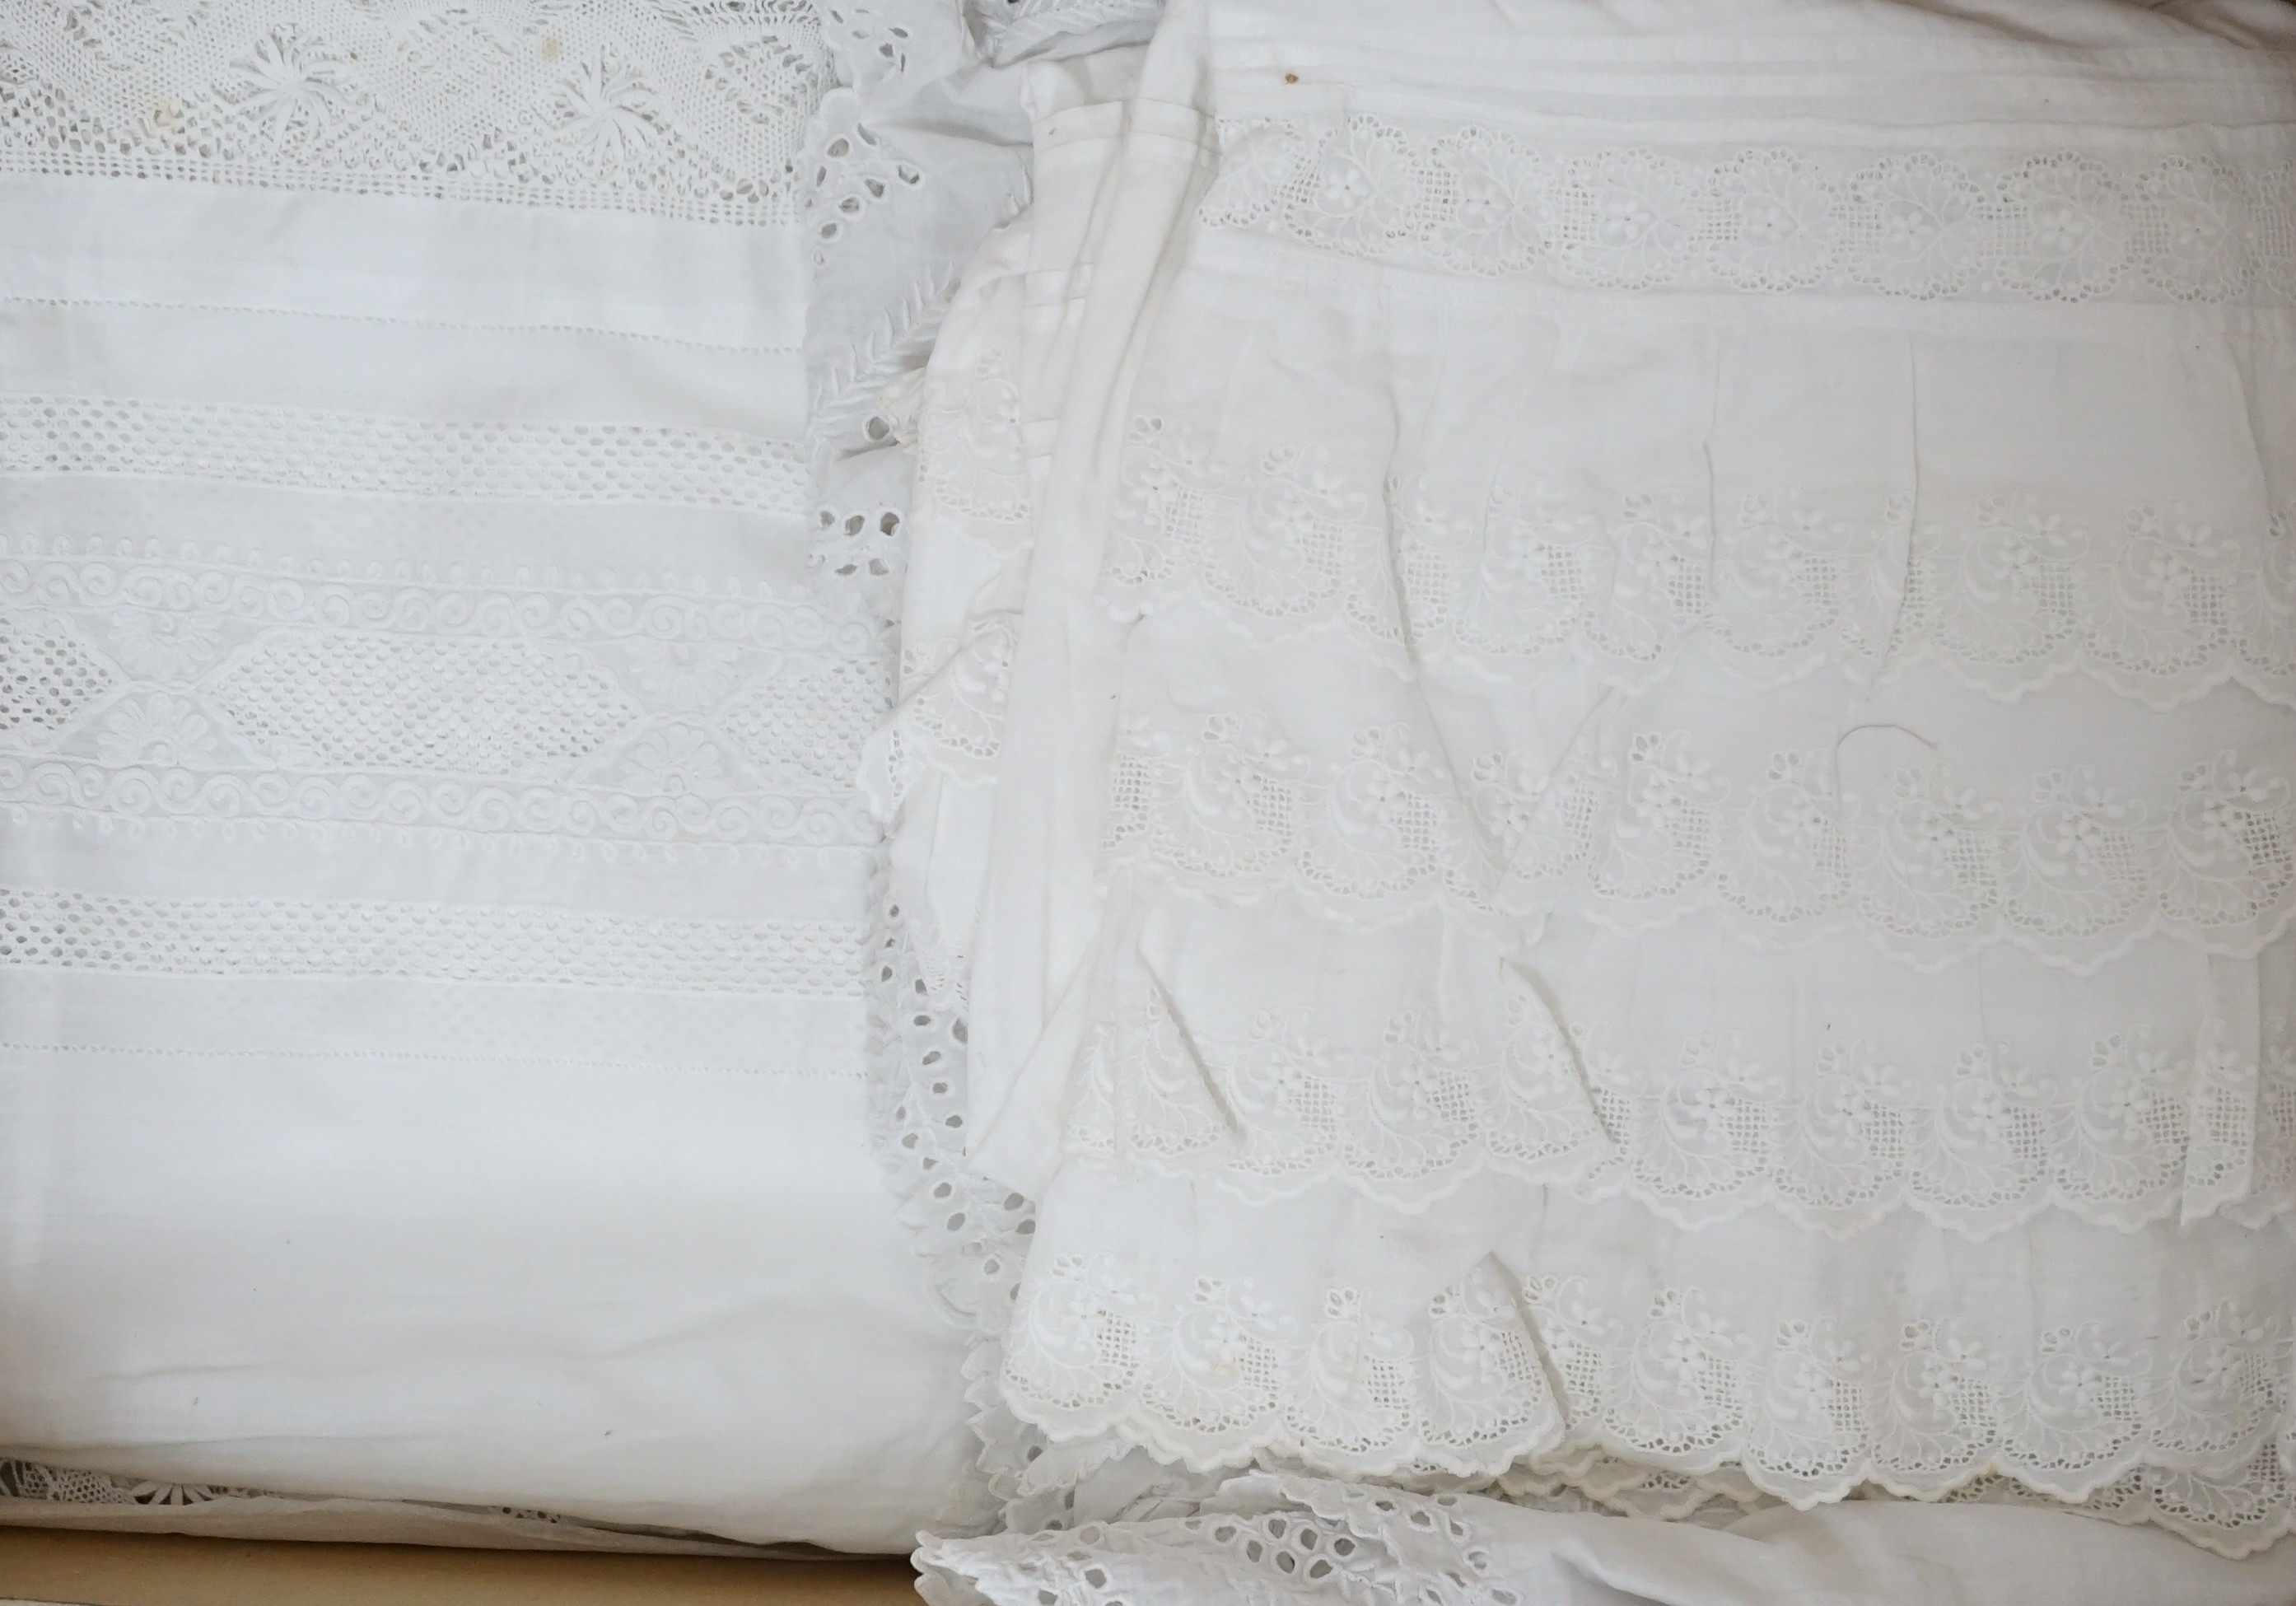 Two silk Maltese collars and a hankie, a needle run veil, Brussels lace fan leaf, Ayreshire embroidered cloth, 2 christening gowns and a bonnet